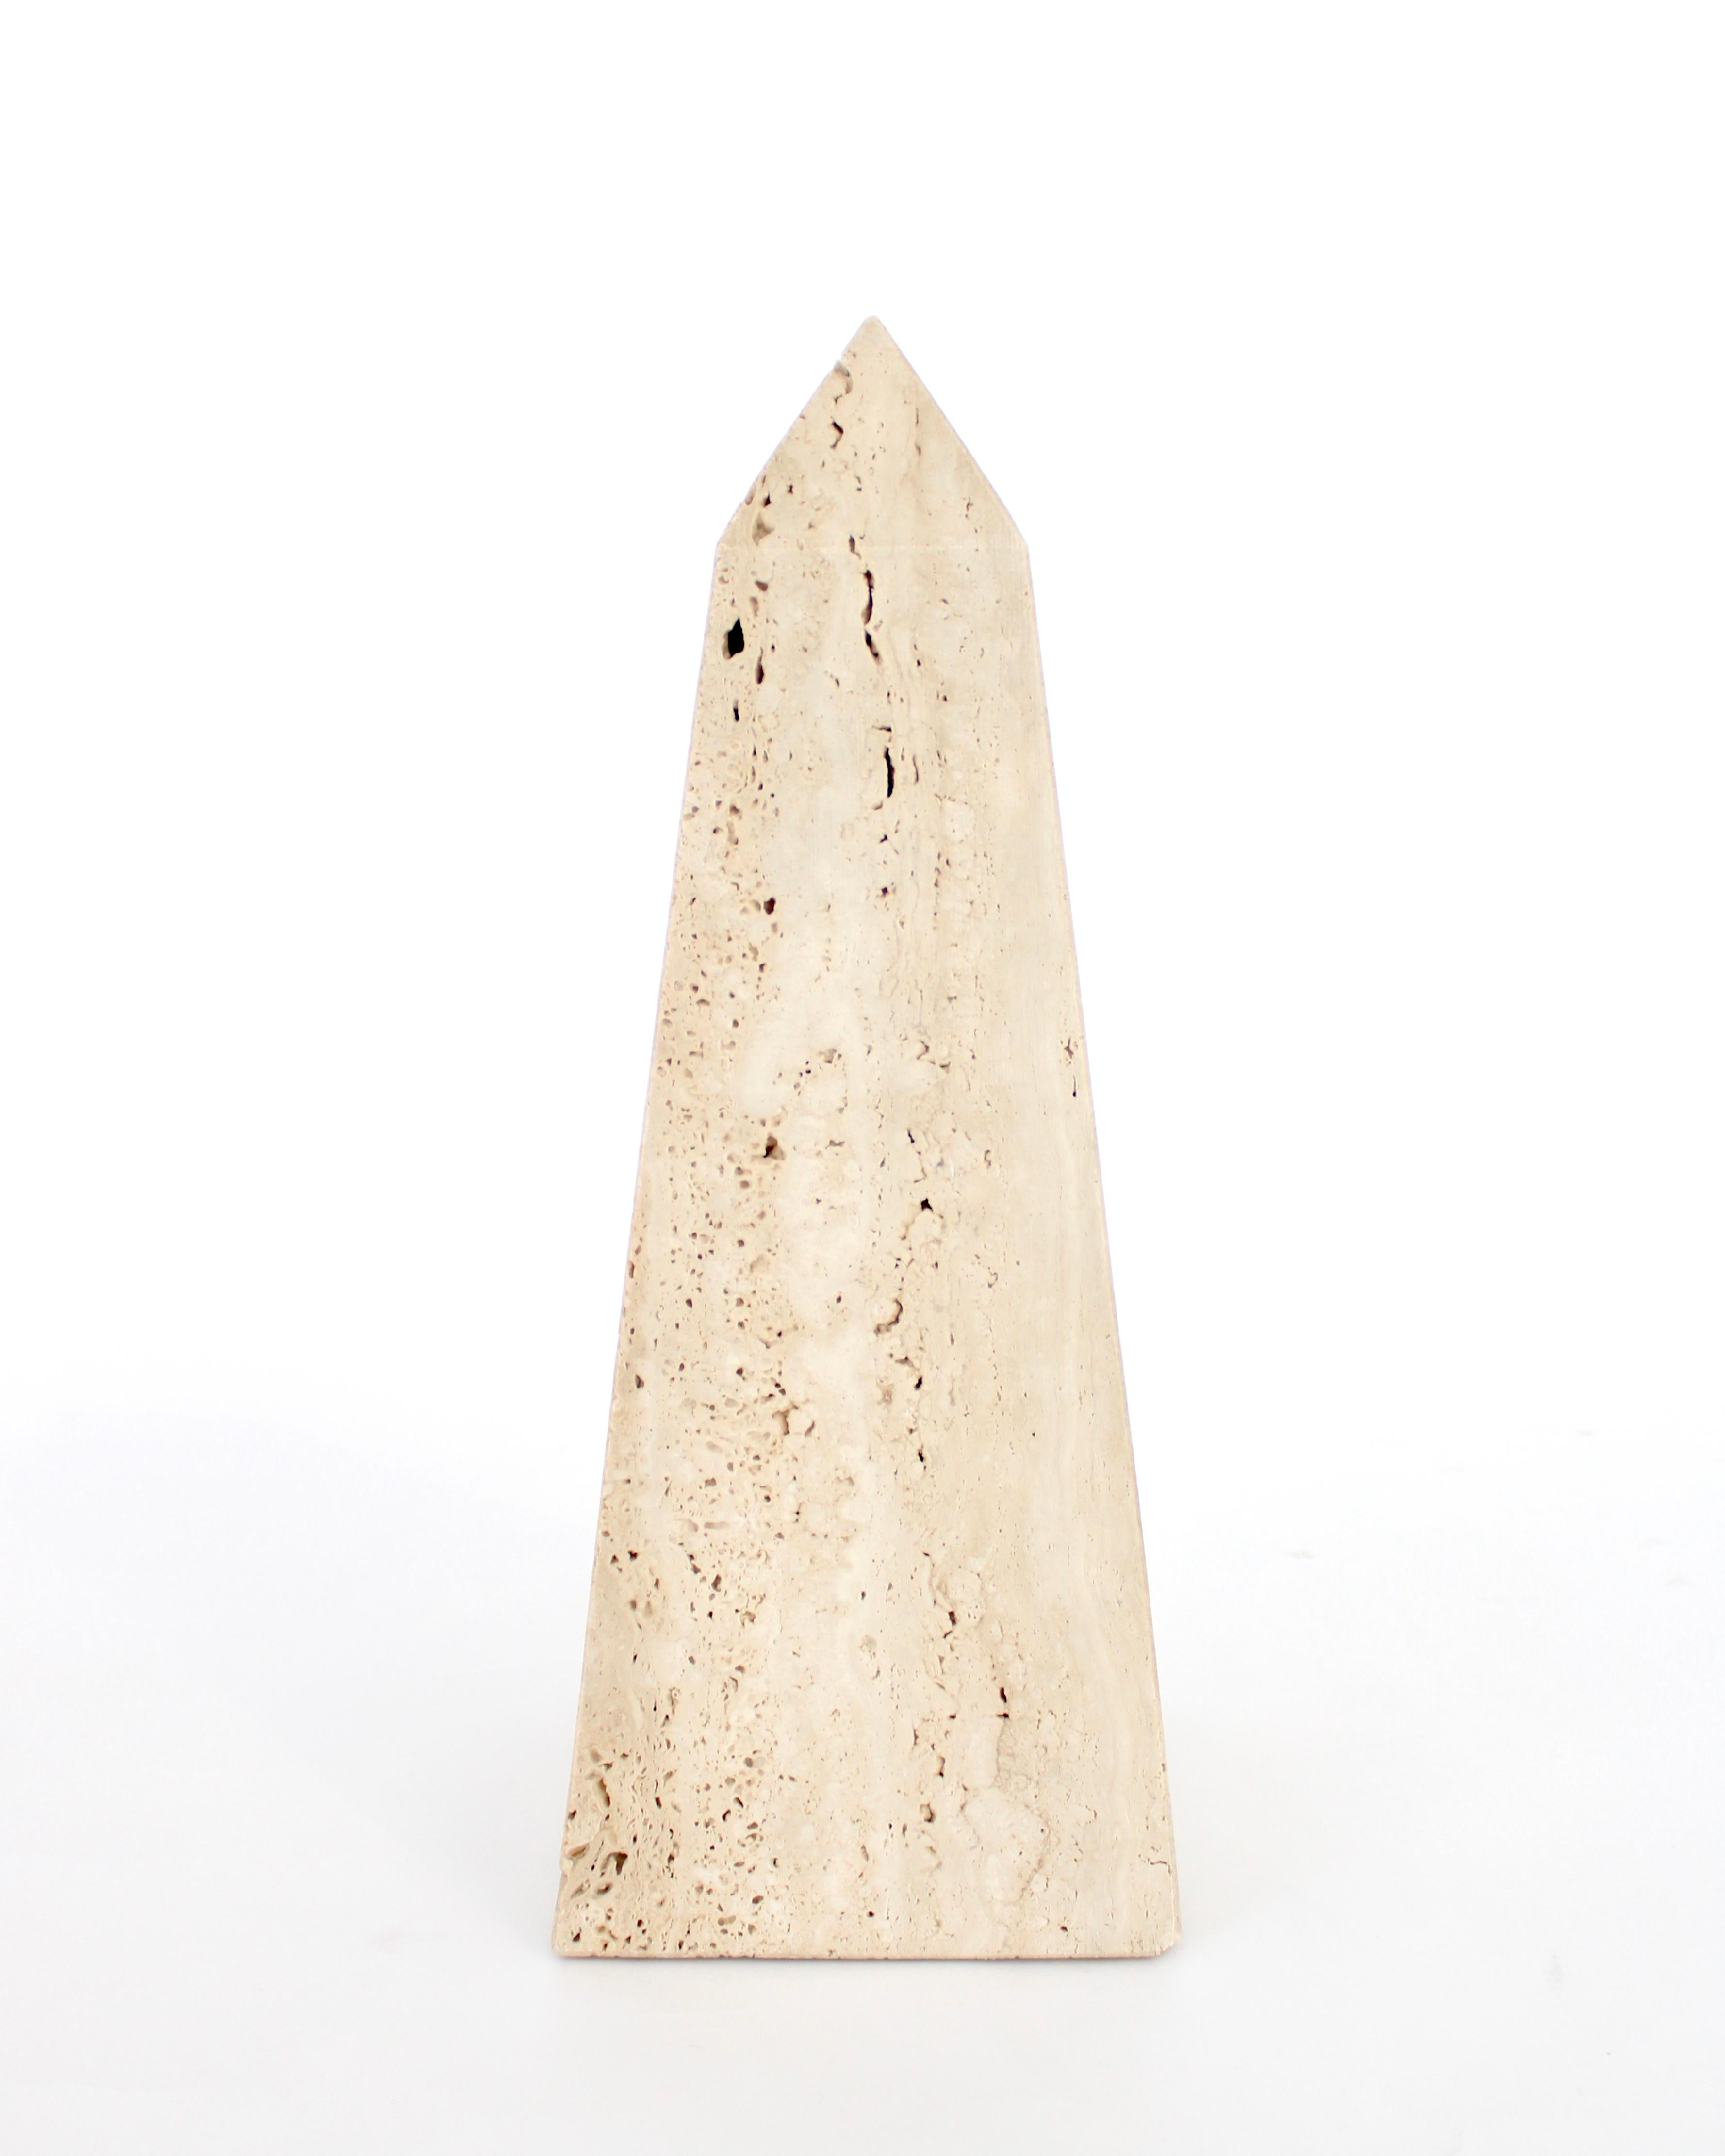 A monumental Italian Travertine decorative obelisk for Raymor.
No chips, lovely cream travertine. Labels intact. Made in Italy. Raymor. 
Overall size: 6